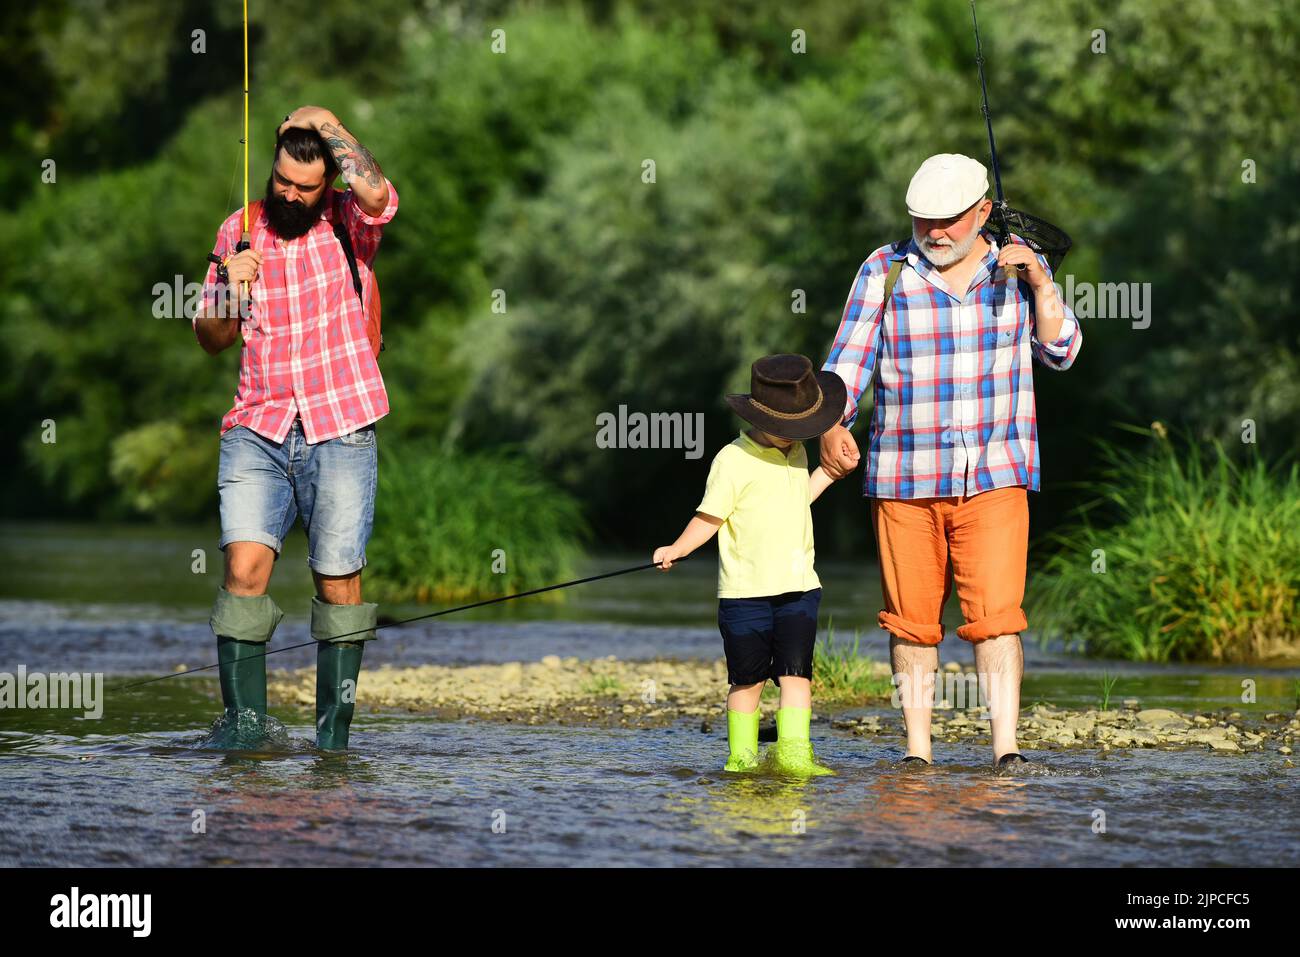 Kids grandfather fishing Stock Vector Images - Alamy